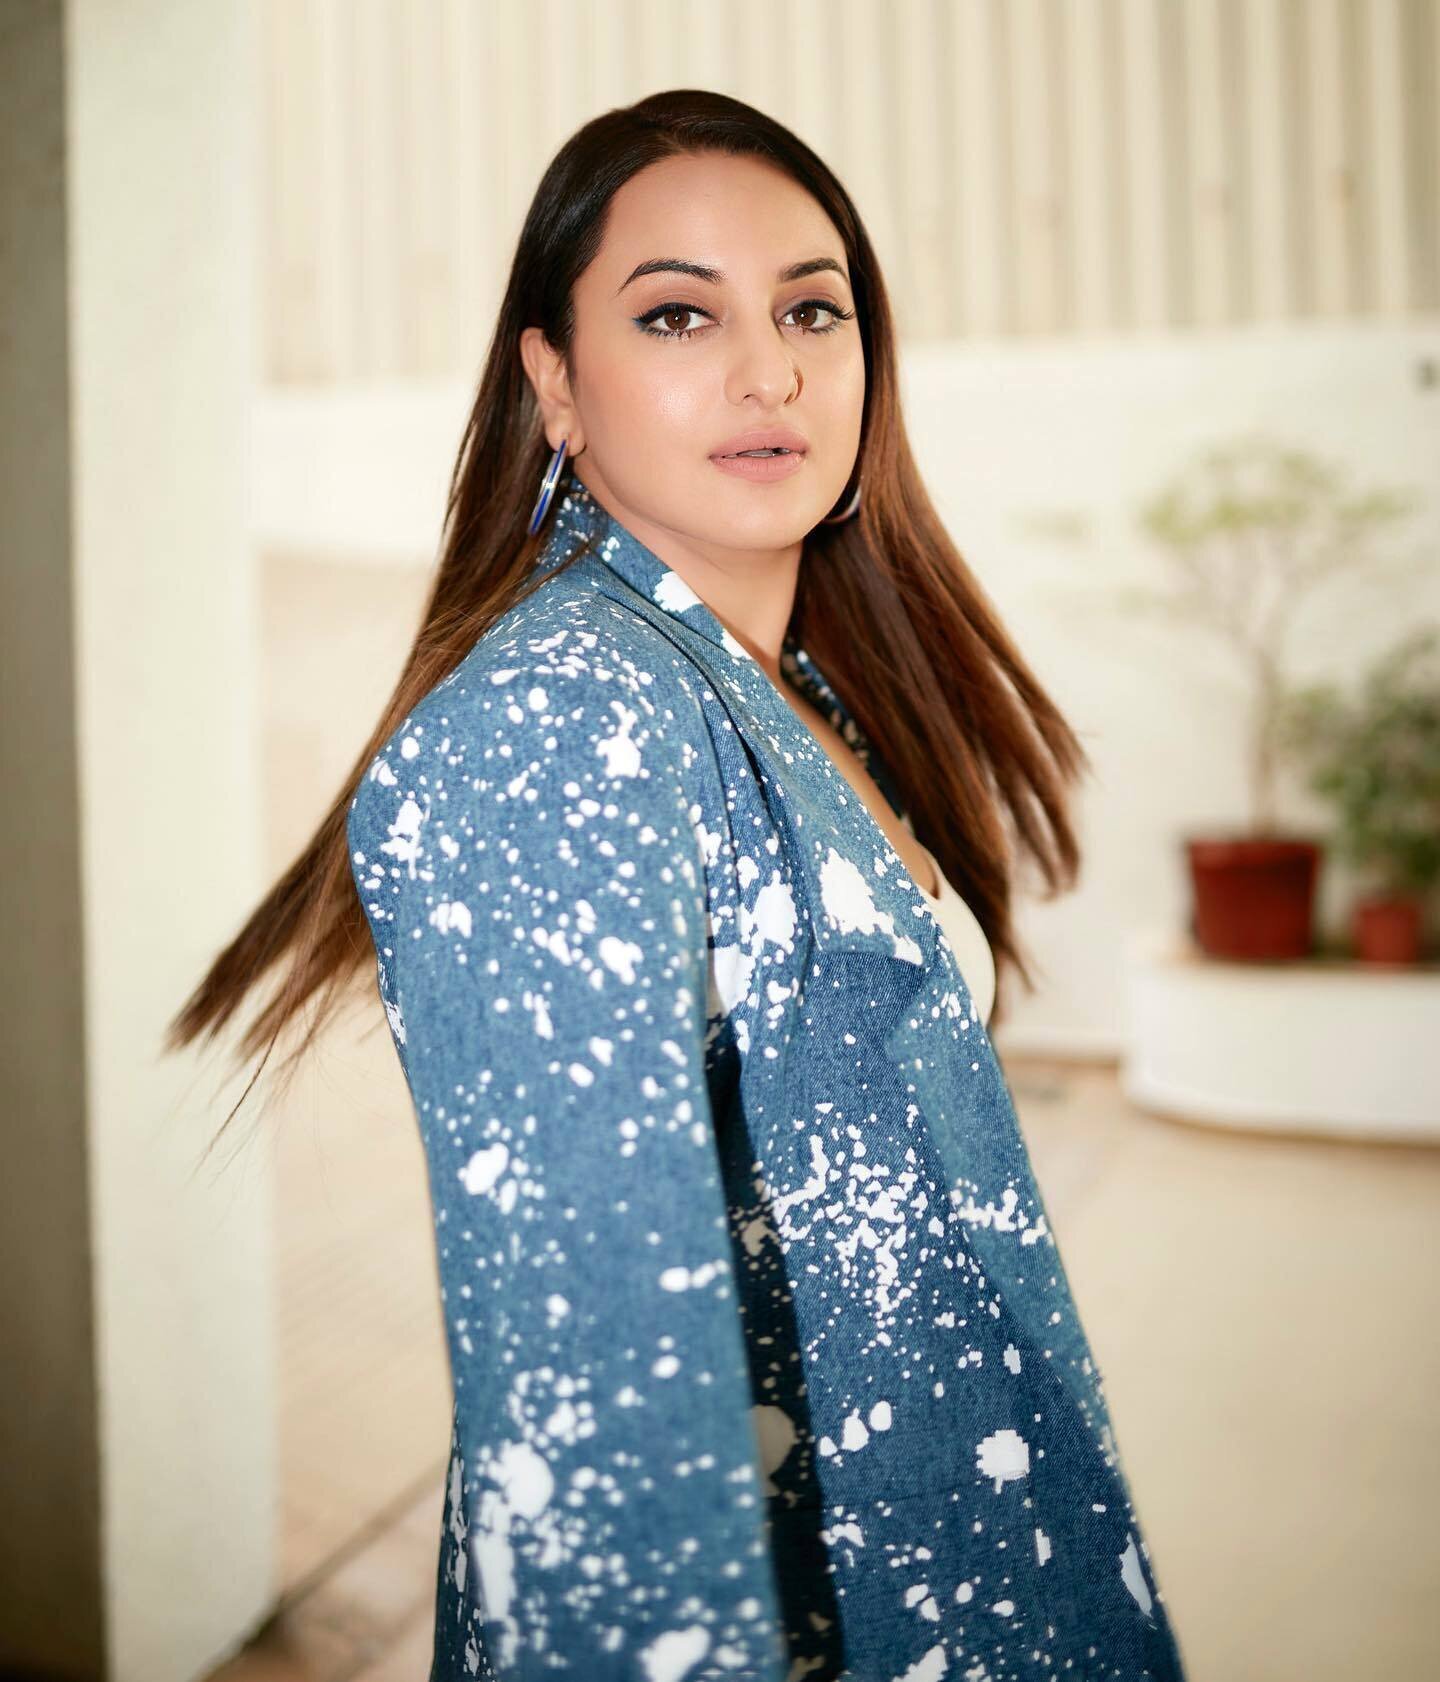 Sonakshi Sinha Latest Photos | Picture 1916075